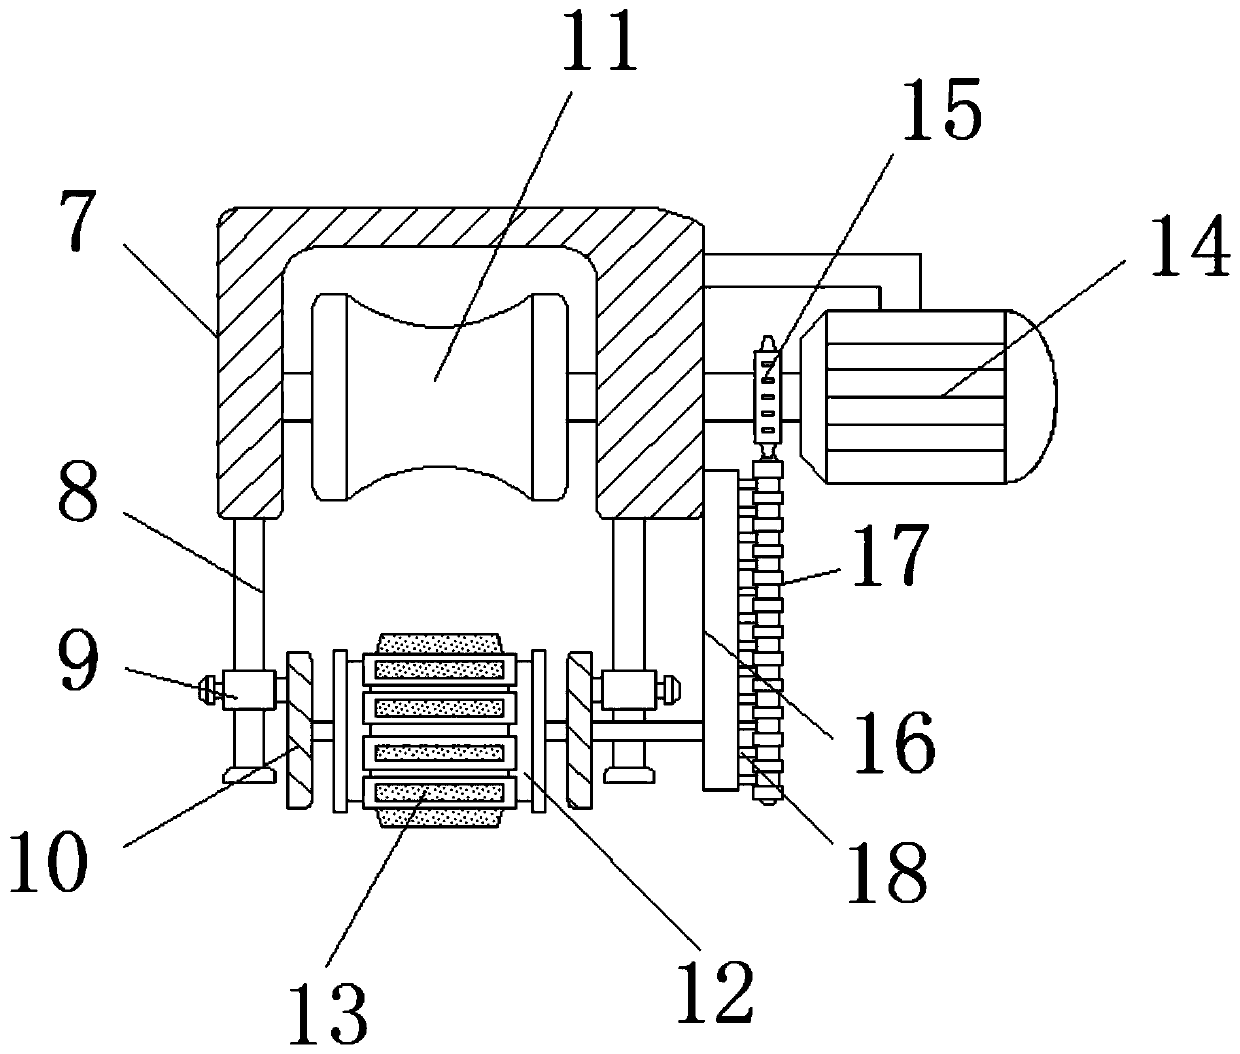 Yarn combing and impurity removing mechanism for textile machine that facilitates collection of impurities